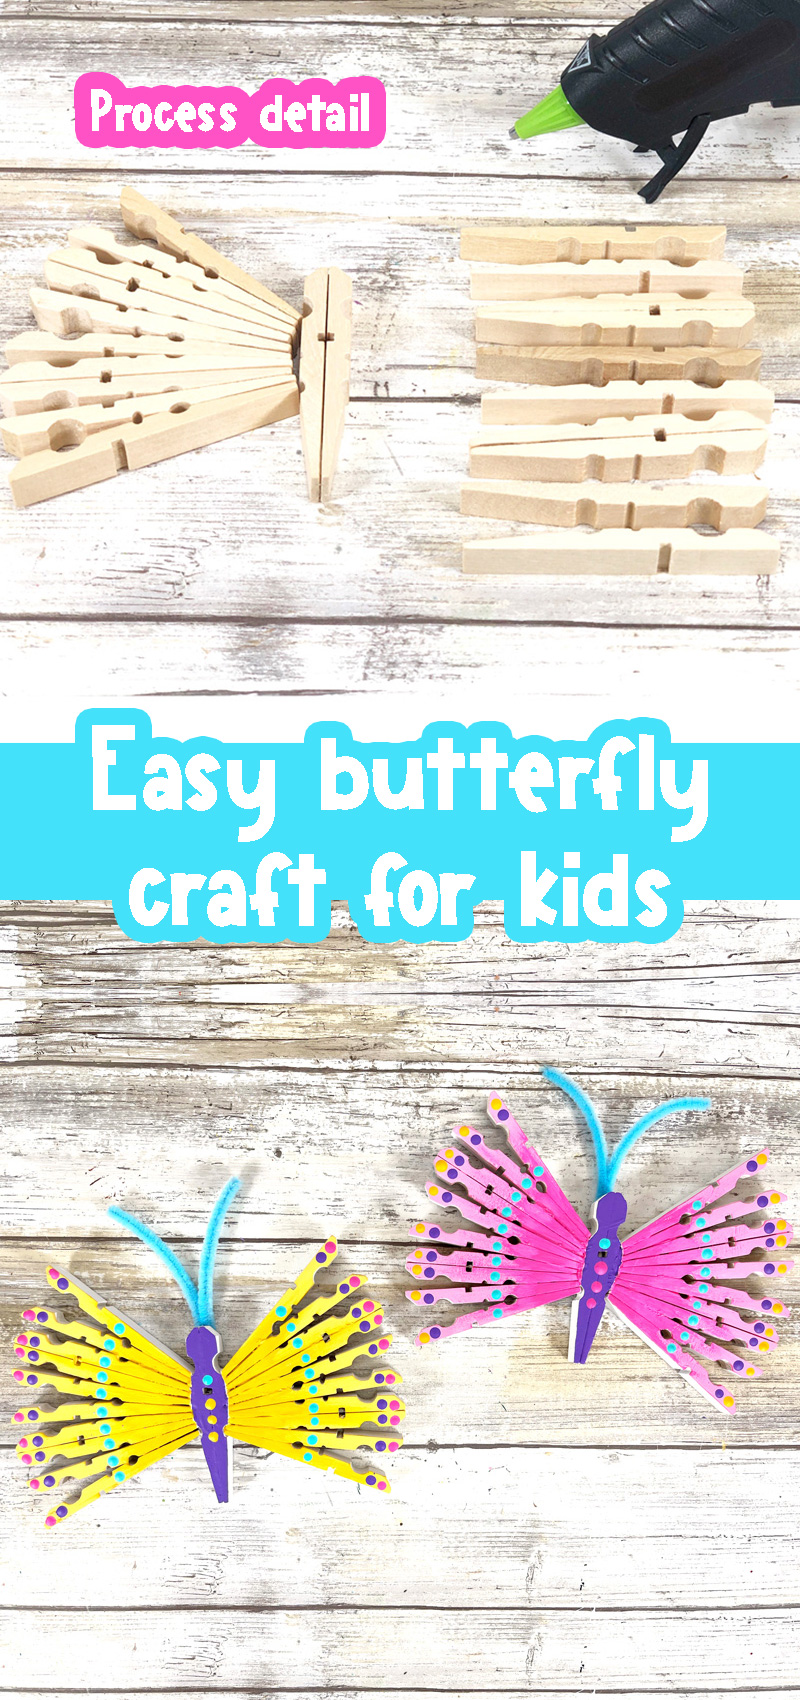 Simple Animal Ribbon Crafts and Projects, animal, butterflies, ribbon,  craft, Creative DIY Butterfly Ribbon Craft Ideas :), By Kids Art & Craft